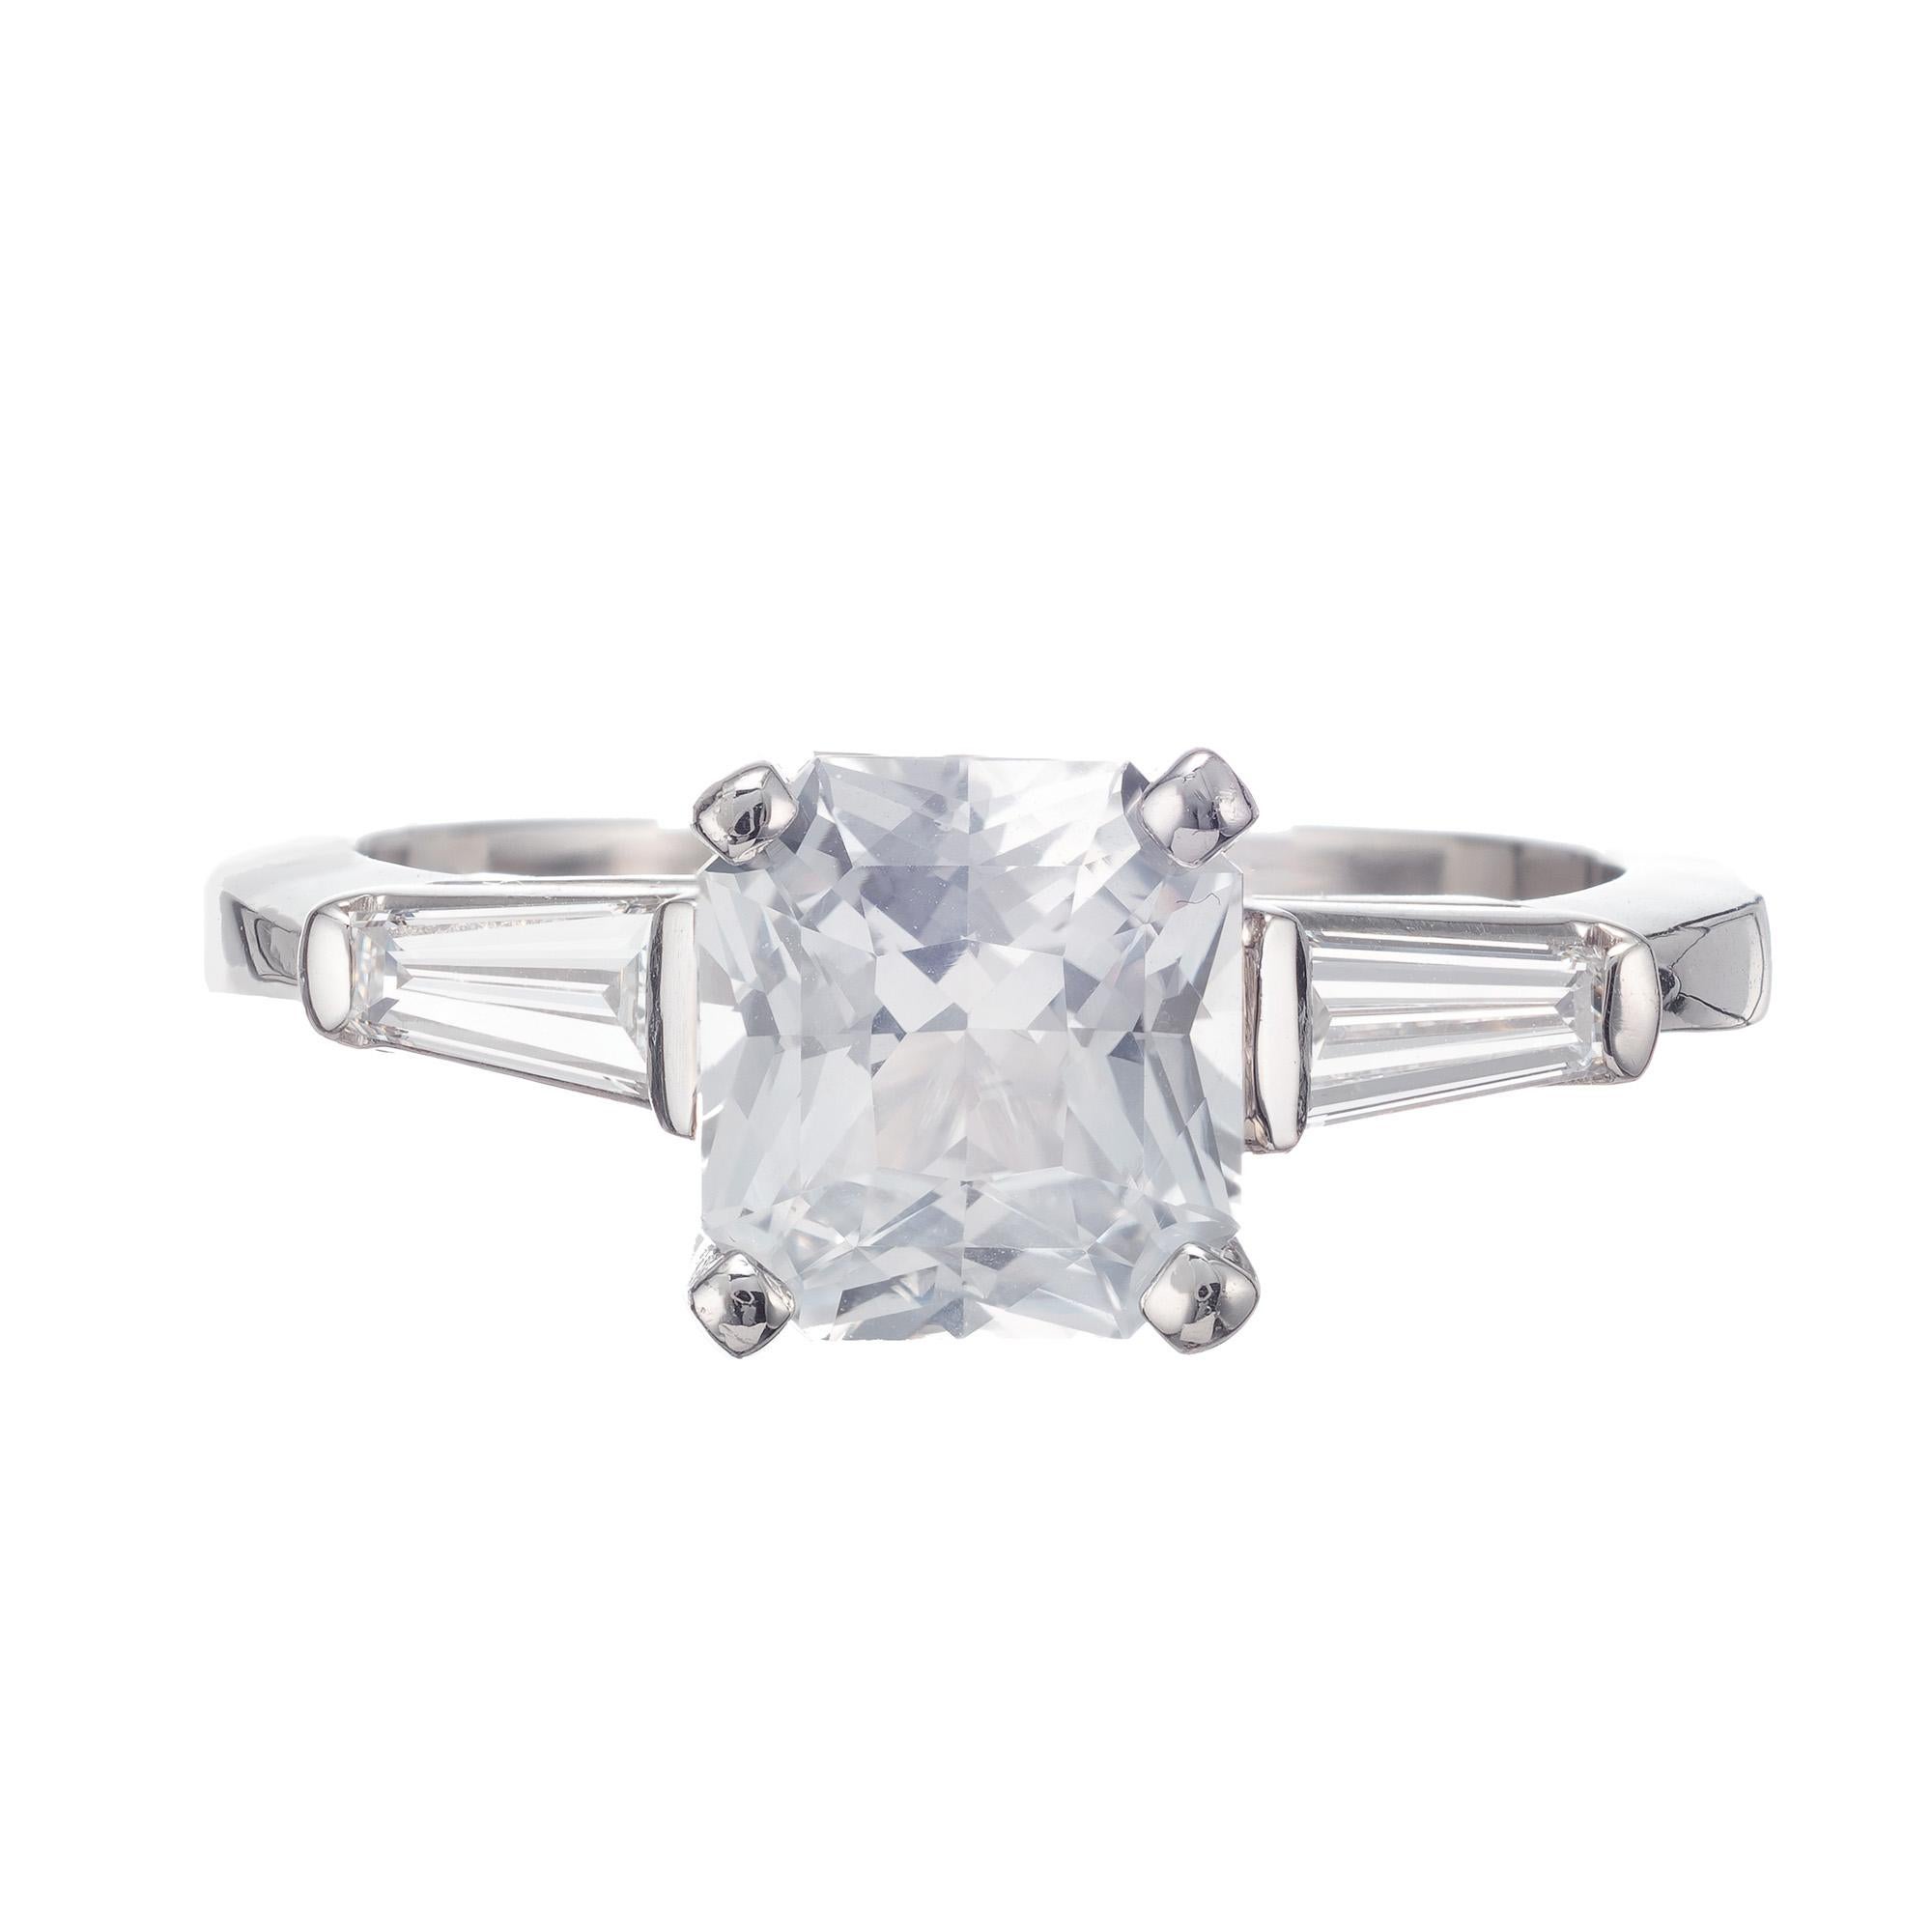 Natural no heat octagonal 2.07 carat sapphire and diamond three-stone engagement ring. Gia certified center stone accented with 2 tapered baguette diamond in a platinum setting made in the Peter Suchy Workshop. 

1 octagonal square white near